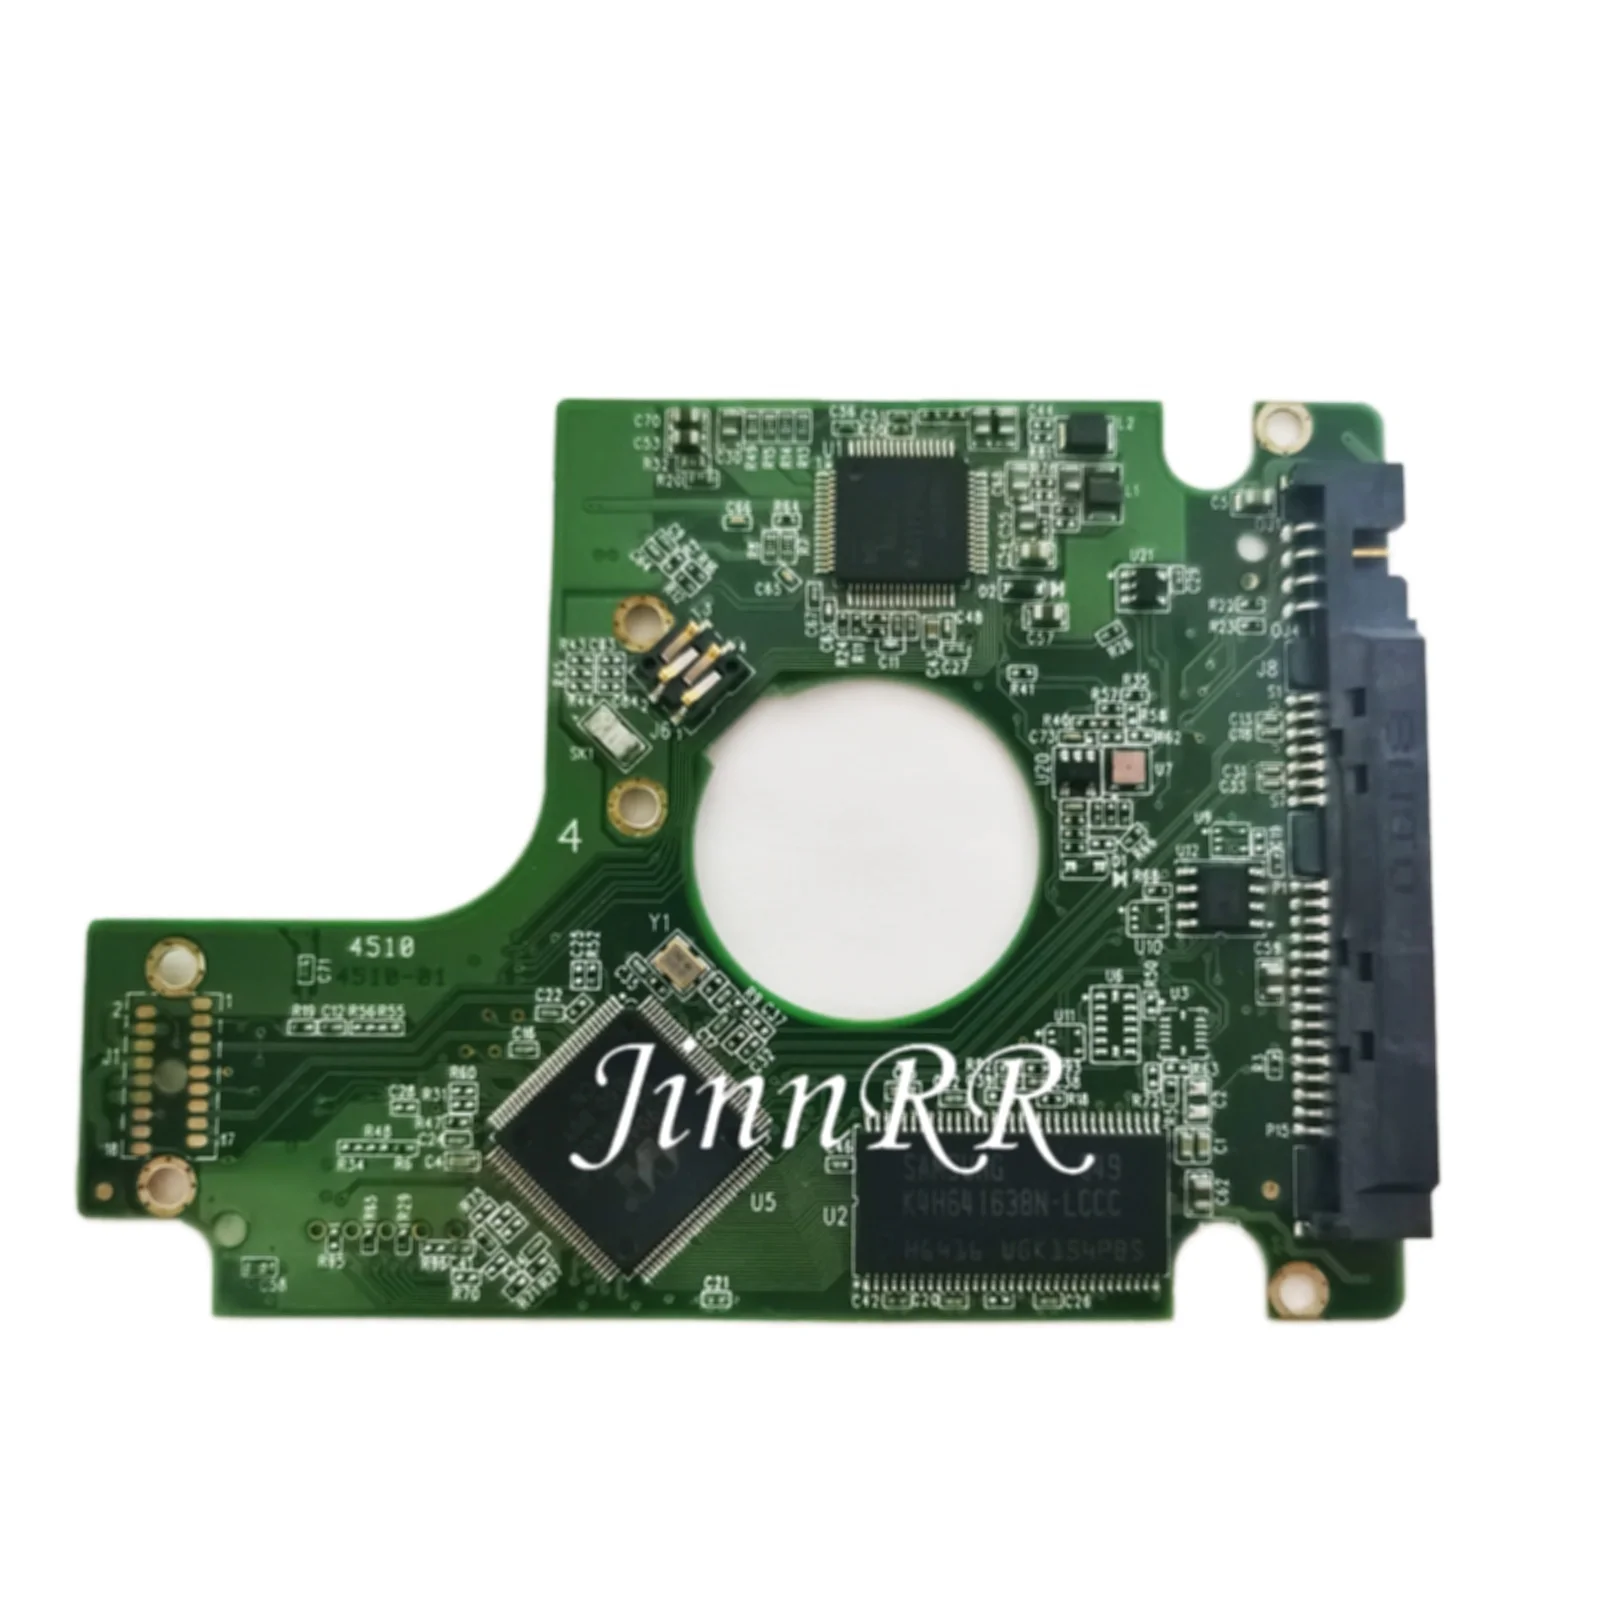 

Logic board PCB 2060-771672-004, printed circuit board 2060-771672-004 Rev a, for hard disk WD 2.5 SATA, data recovery and